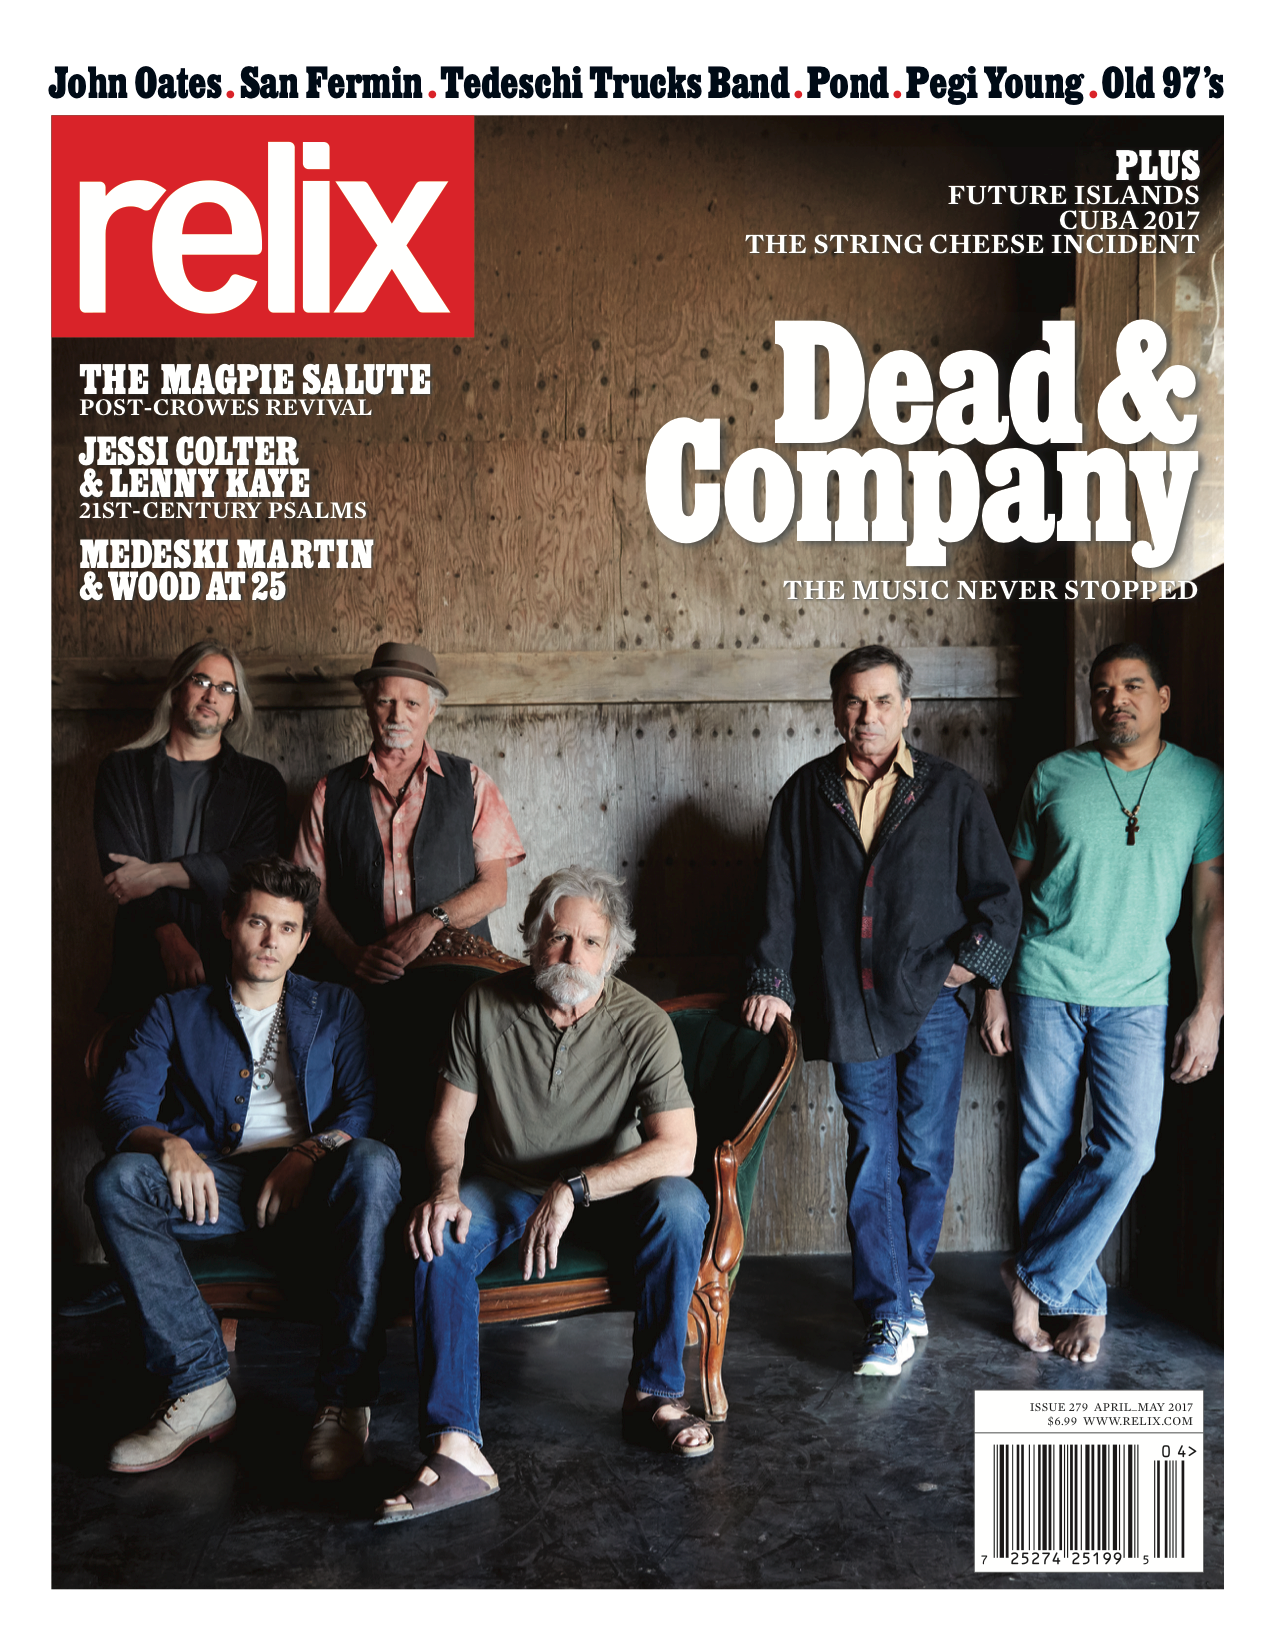 April/May 2017 Relix Cover Poster Featuring Dead & Company - 30" x 40" (Printed on Vinyl)